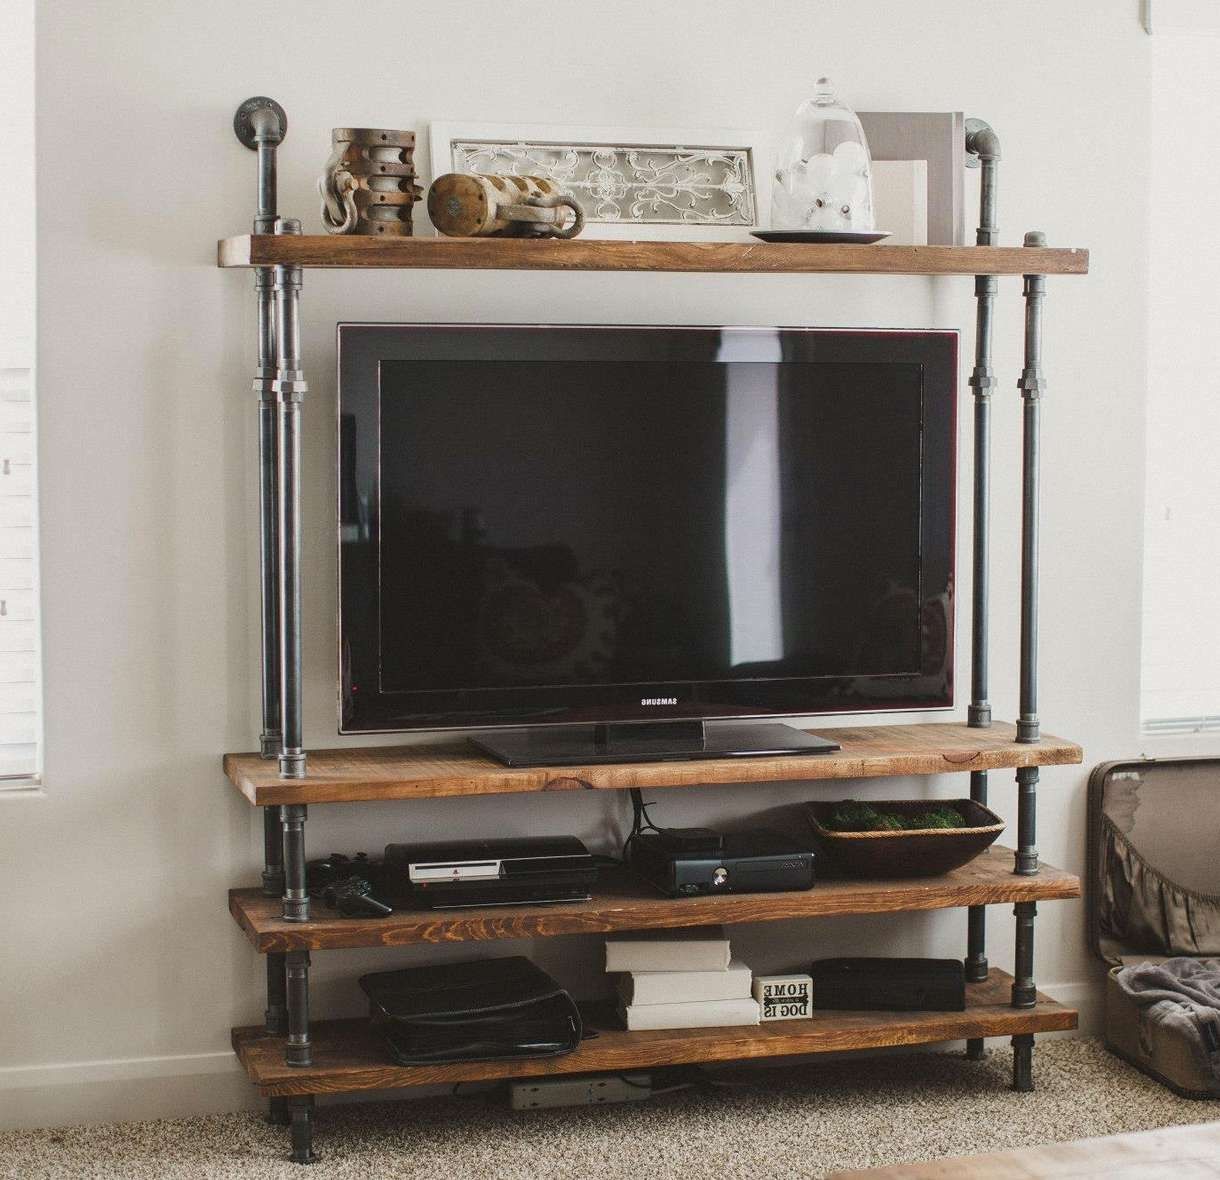 Tv : Beautiful Long Tv Stands Furniture Dramatic Long Tv Cabinet Regarding Long Tv Cabinets Furniture (View 14 of 20)